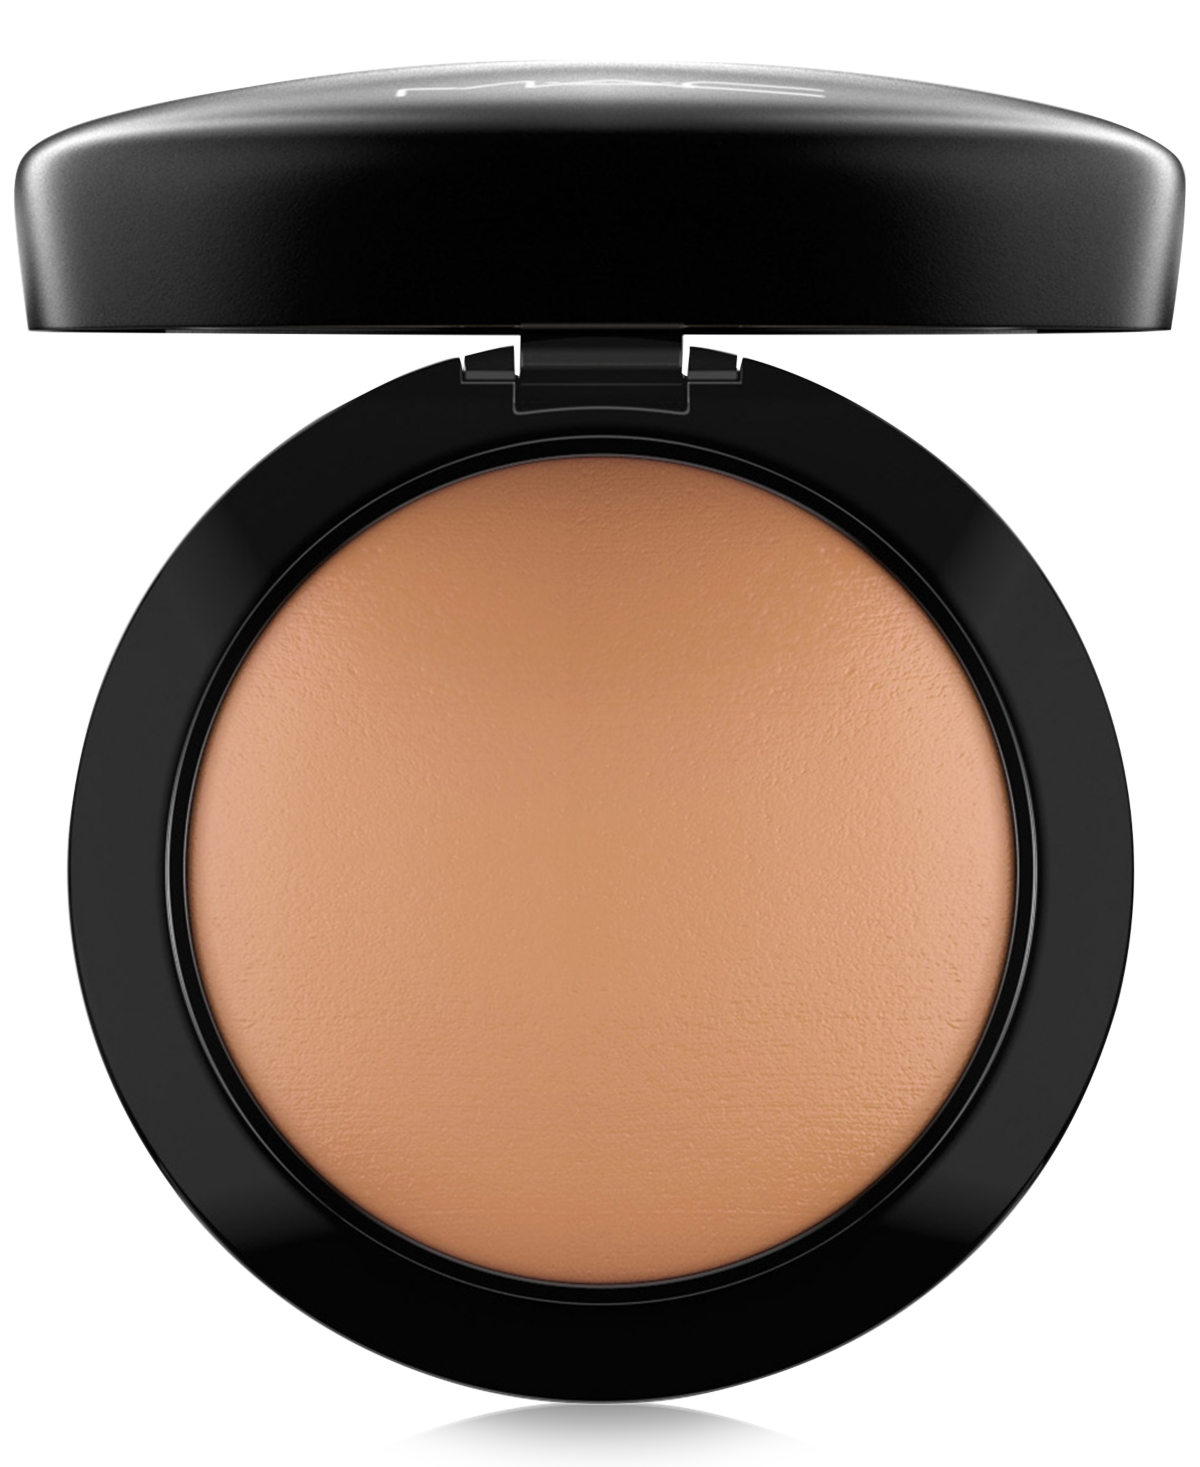 Mac Mineralize Skinfinish Natural In Give Me Sun